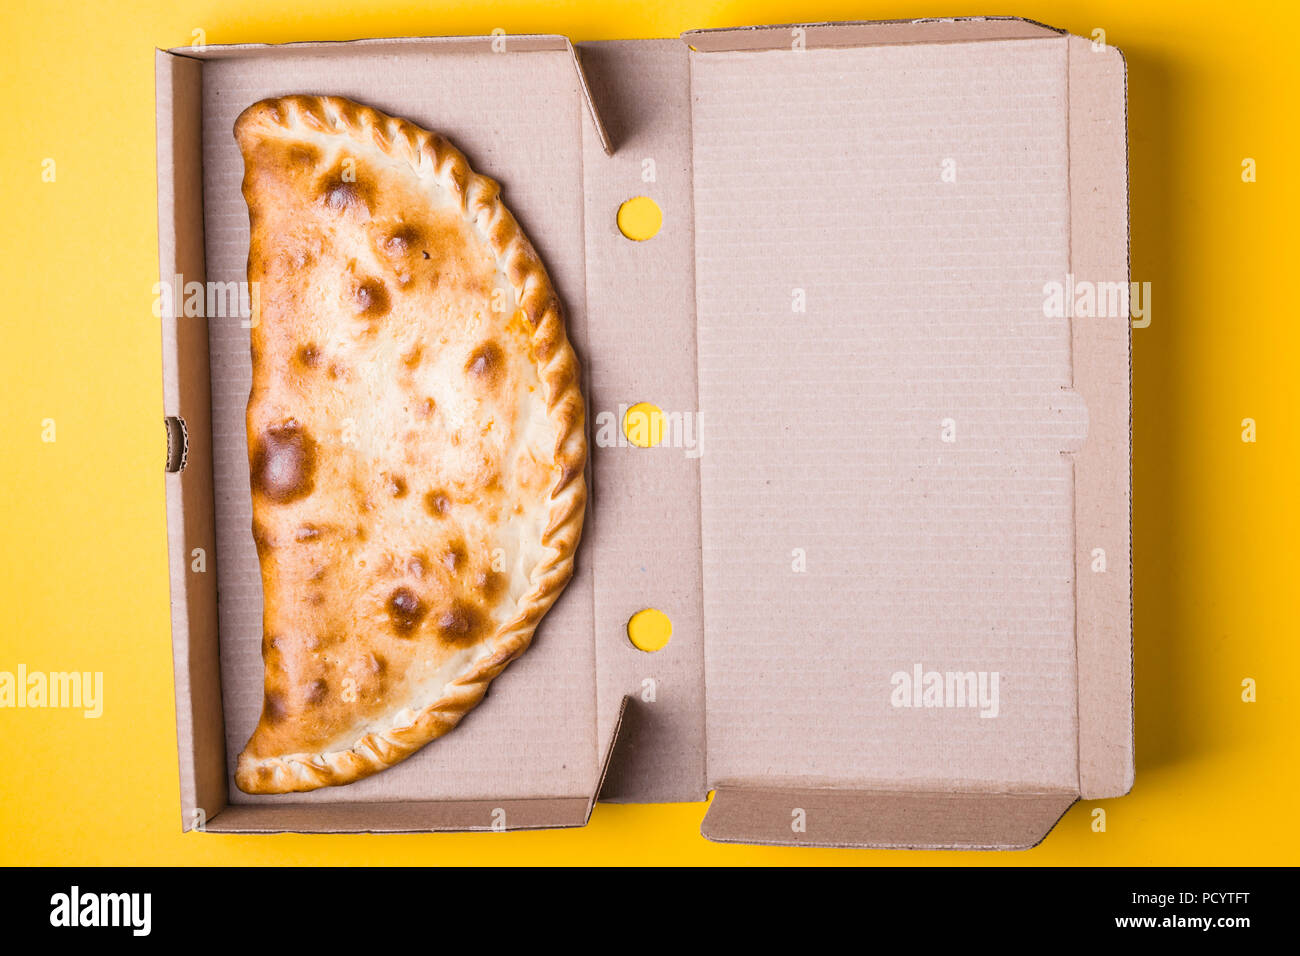 Download Closed Pizza Calzone In A Packing Box On A Yellow Background Stock Photo Alamy Yellowimages Mockups